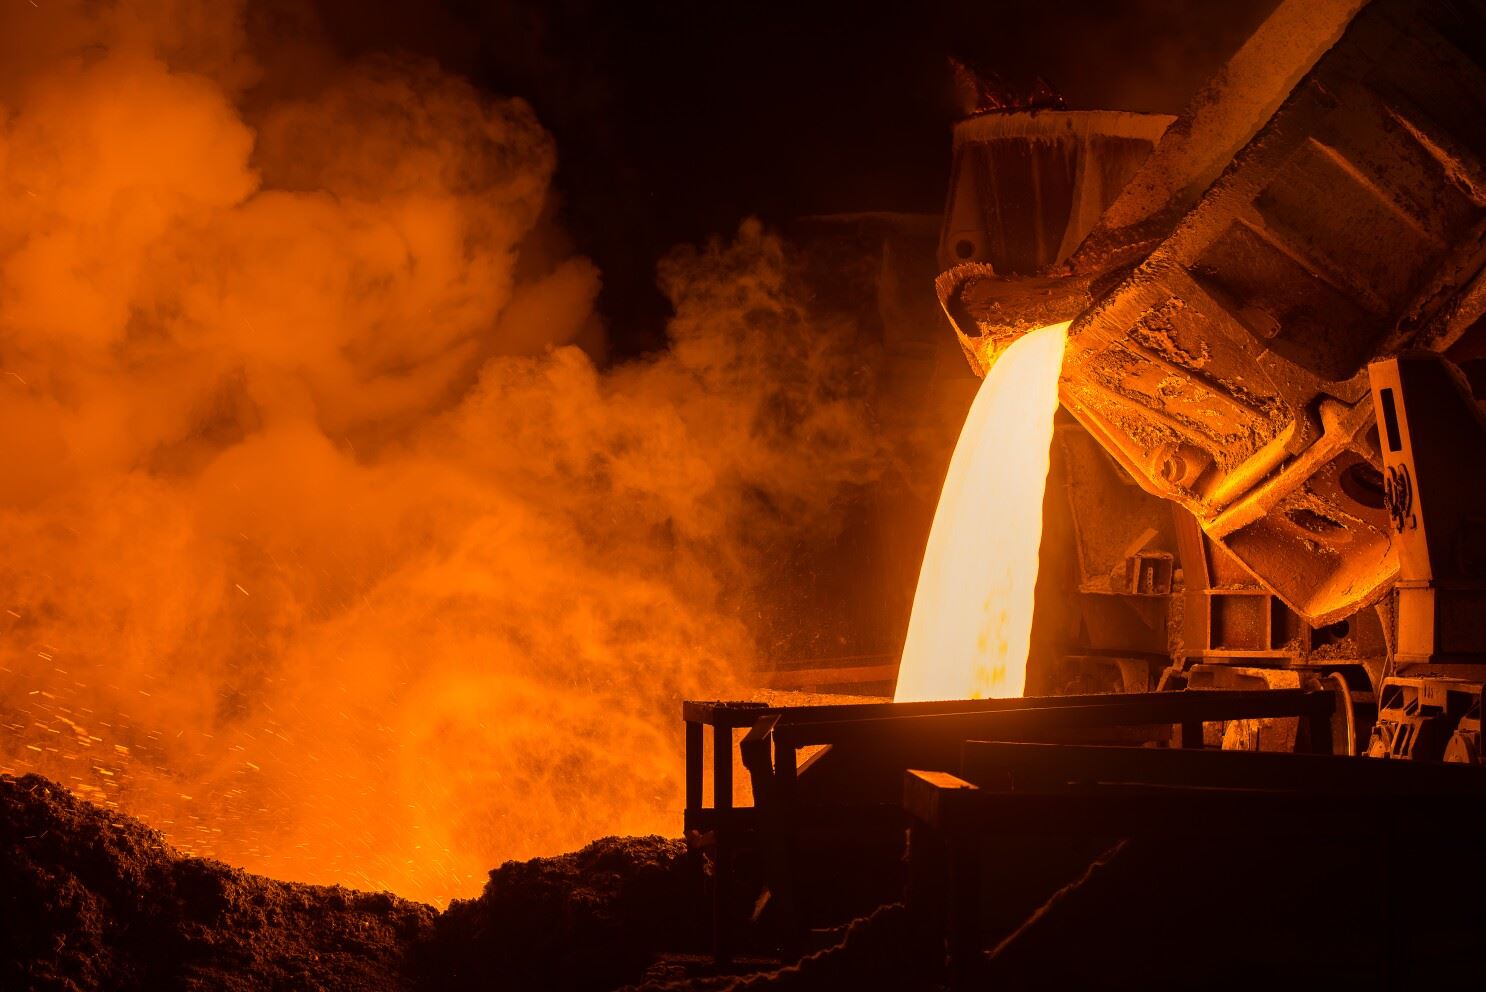 Steel consumption in Brazil fell by 12.6% in April